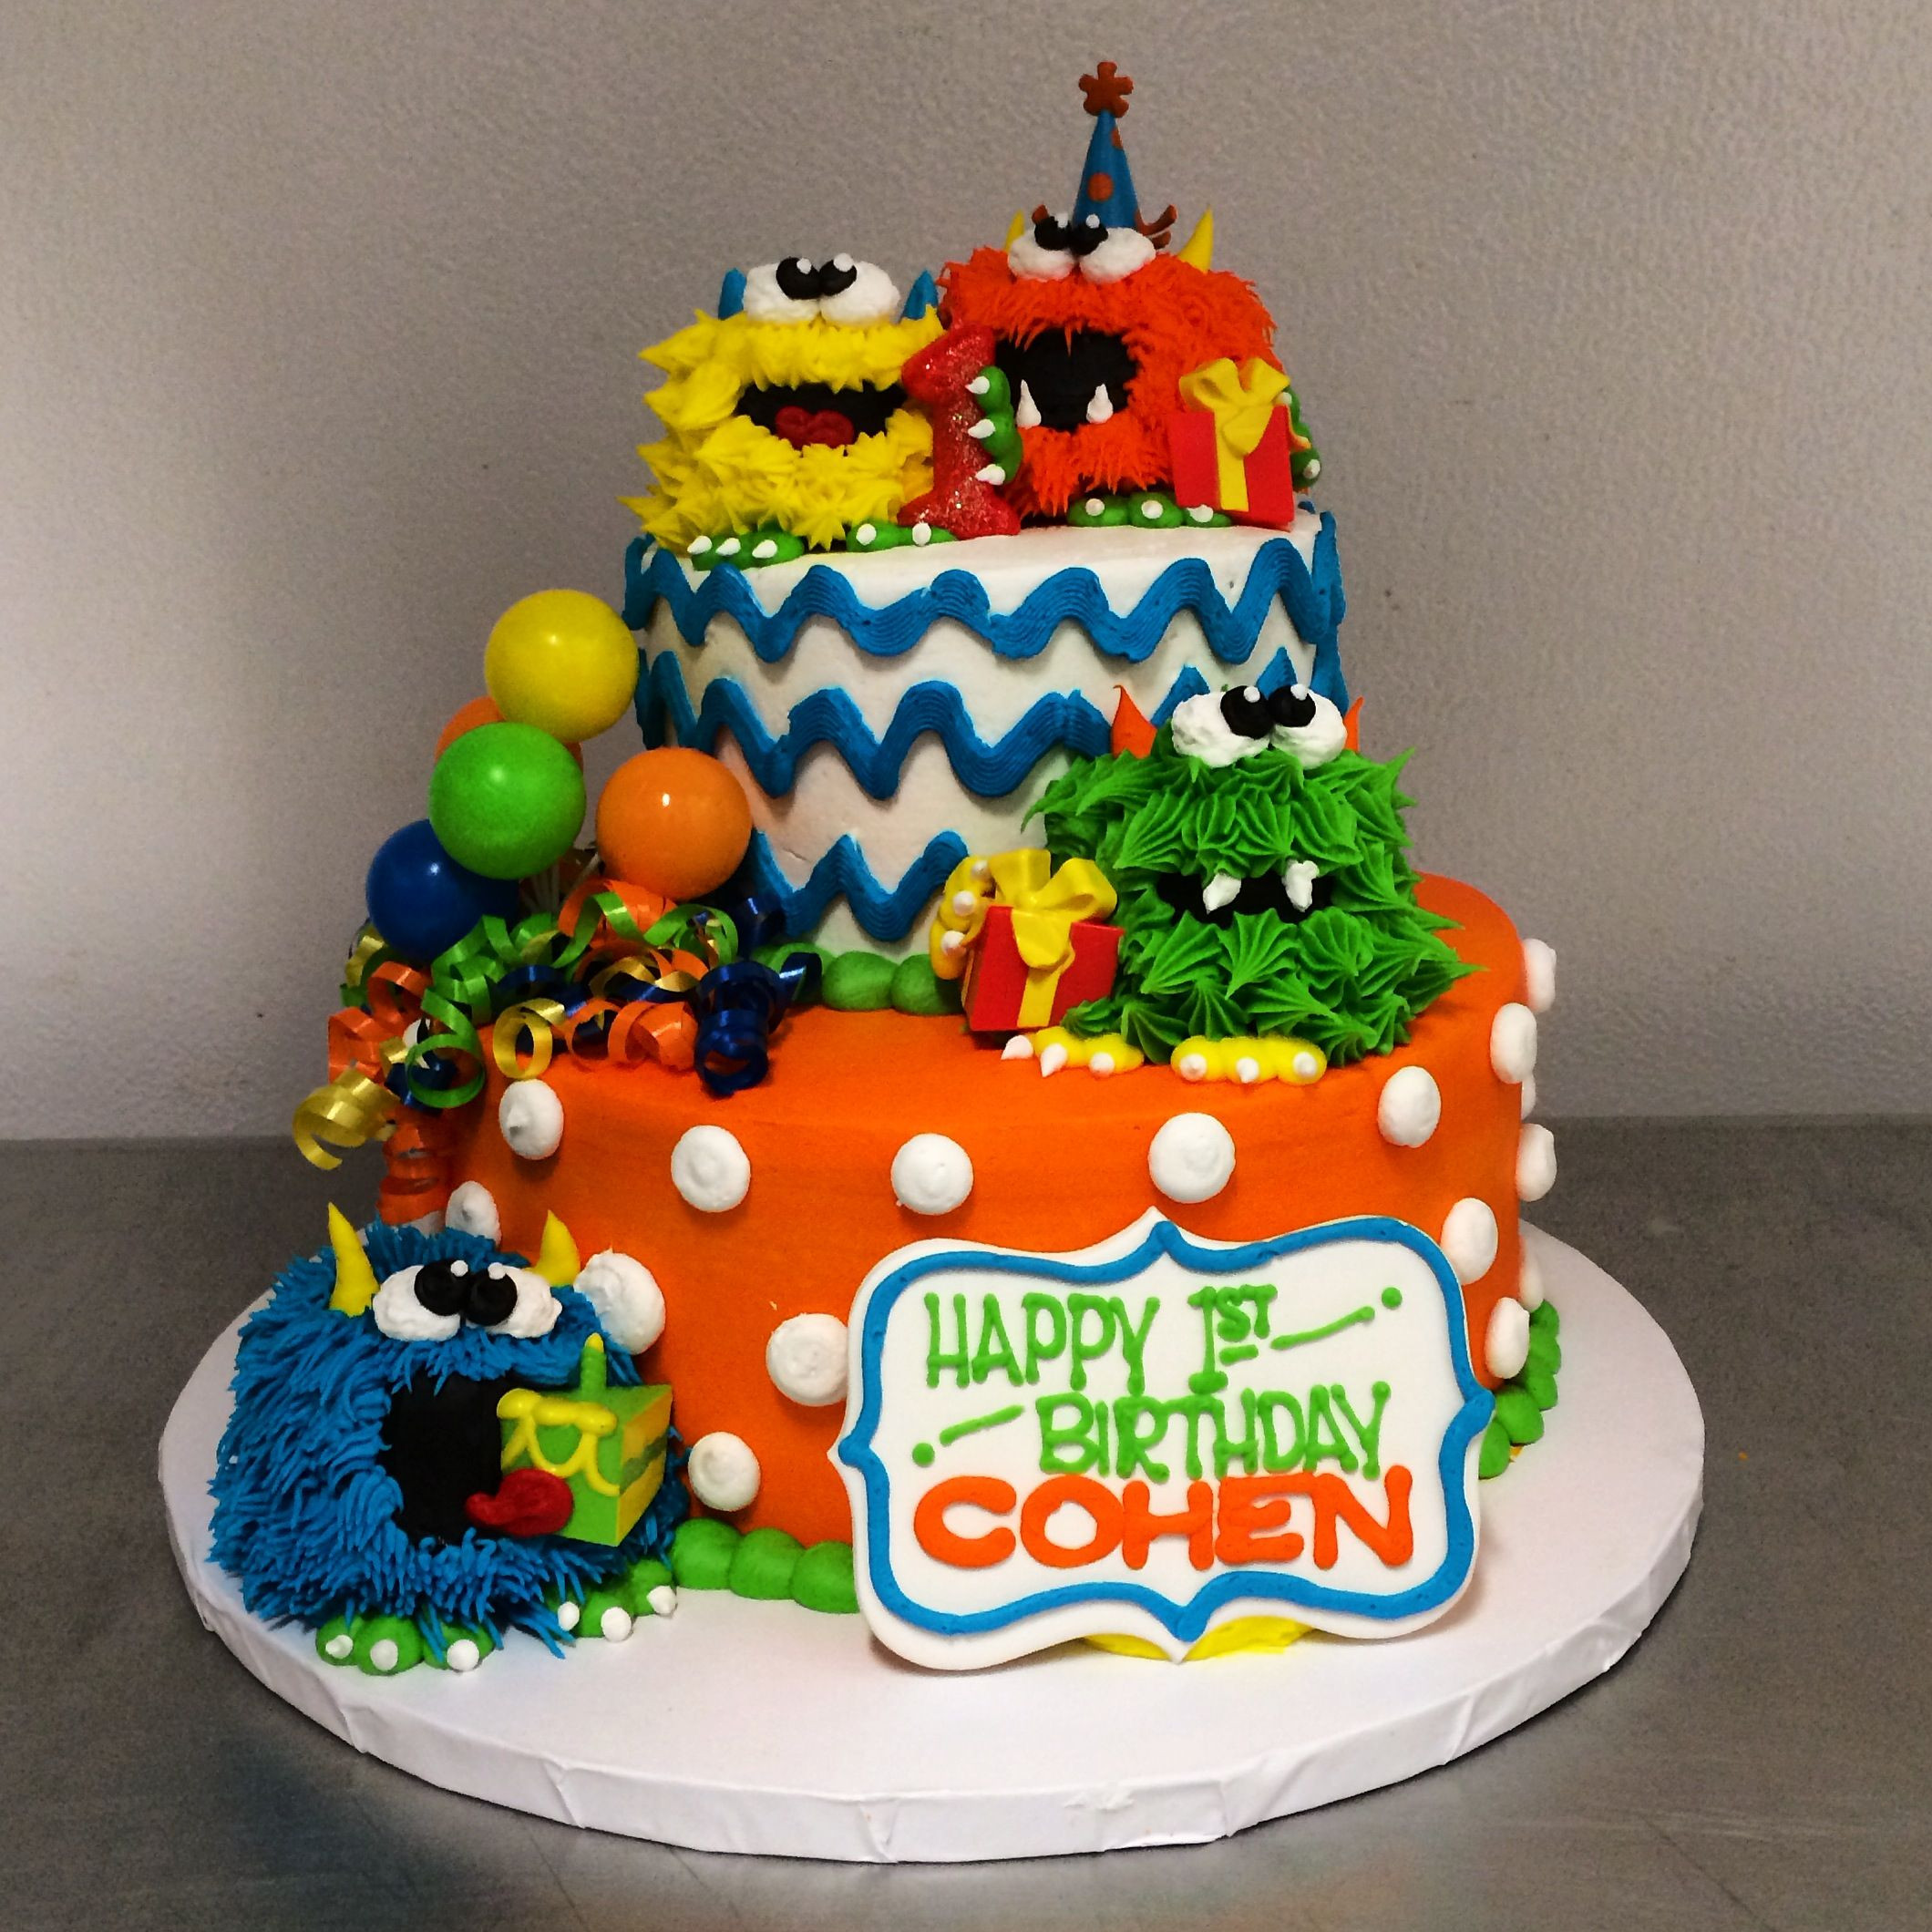 Hy Vee Birthday Cakes
 Little Monster First Birthday Party Cake by Stephanie